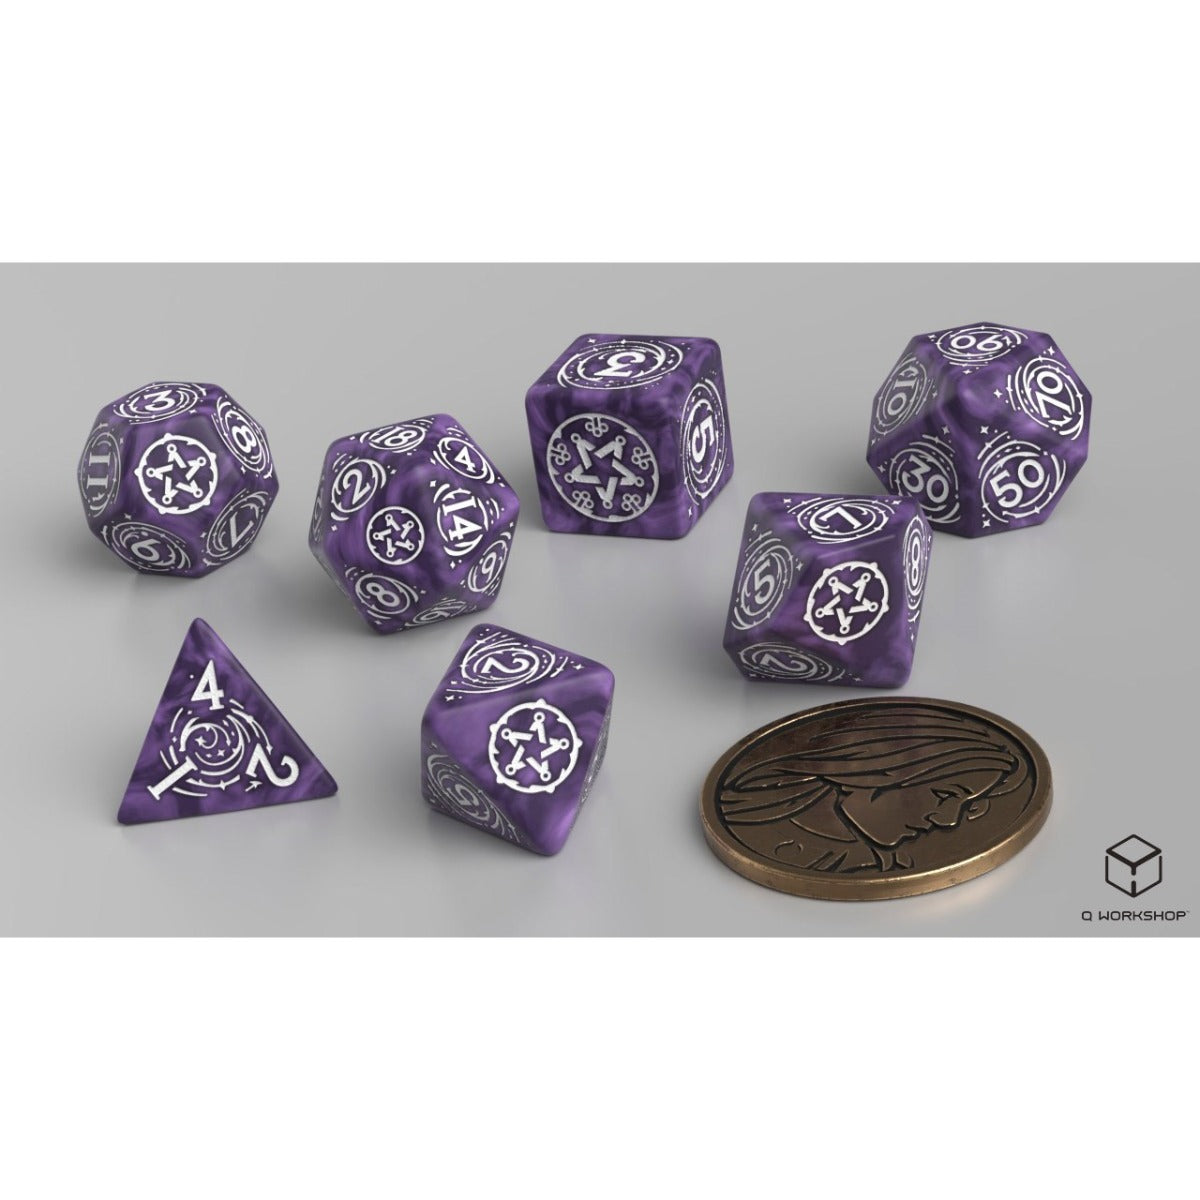 Q Workshop - The Witcher Dice Set Yennefer - Lilac And Gooseberries Dice Set 7 With Coin